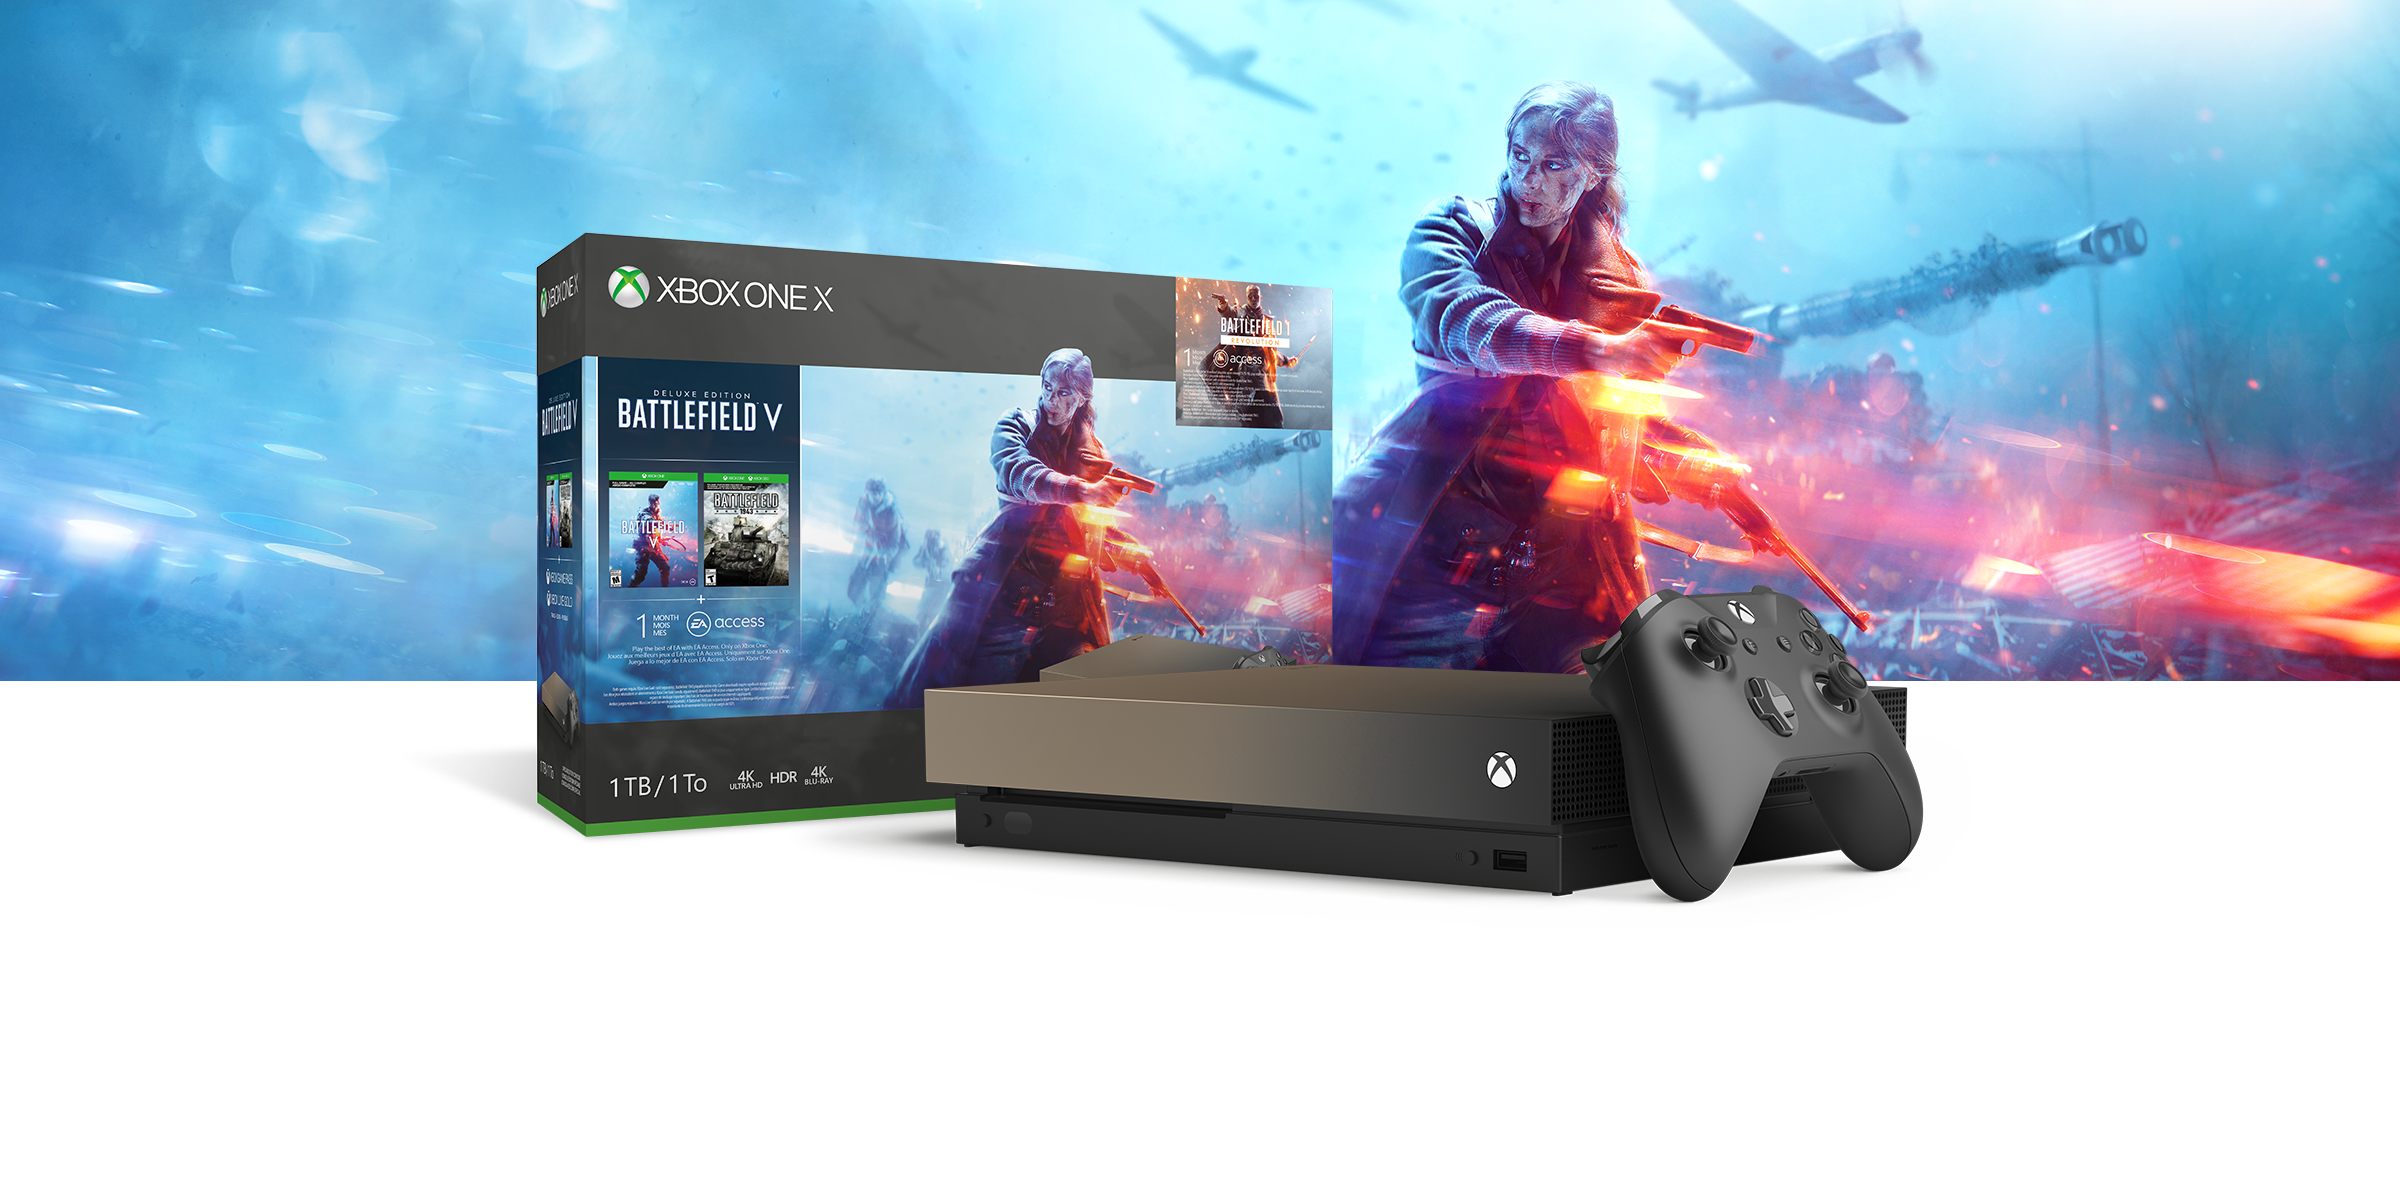 Xbox One X 1TB Console - Gold Rush Special Edition Battlefield V Bundle